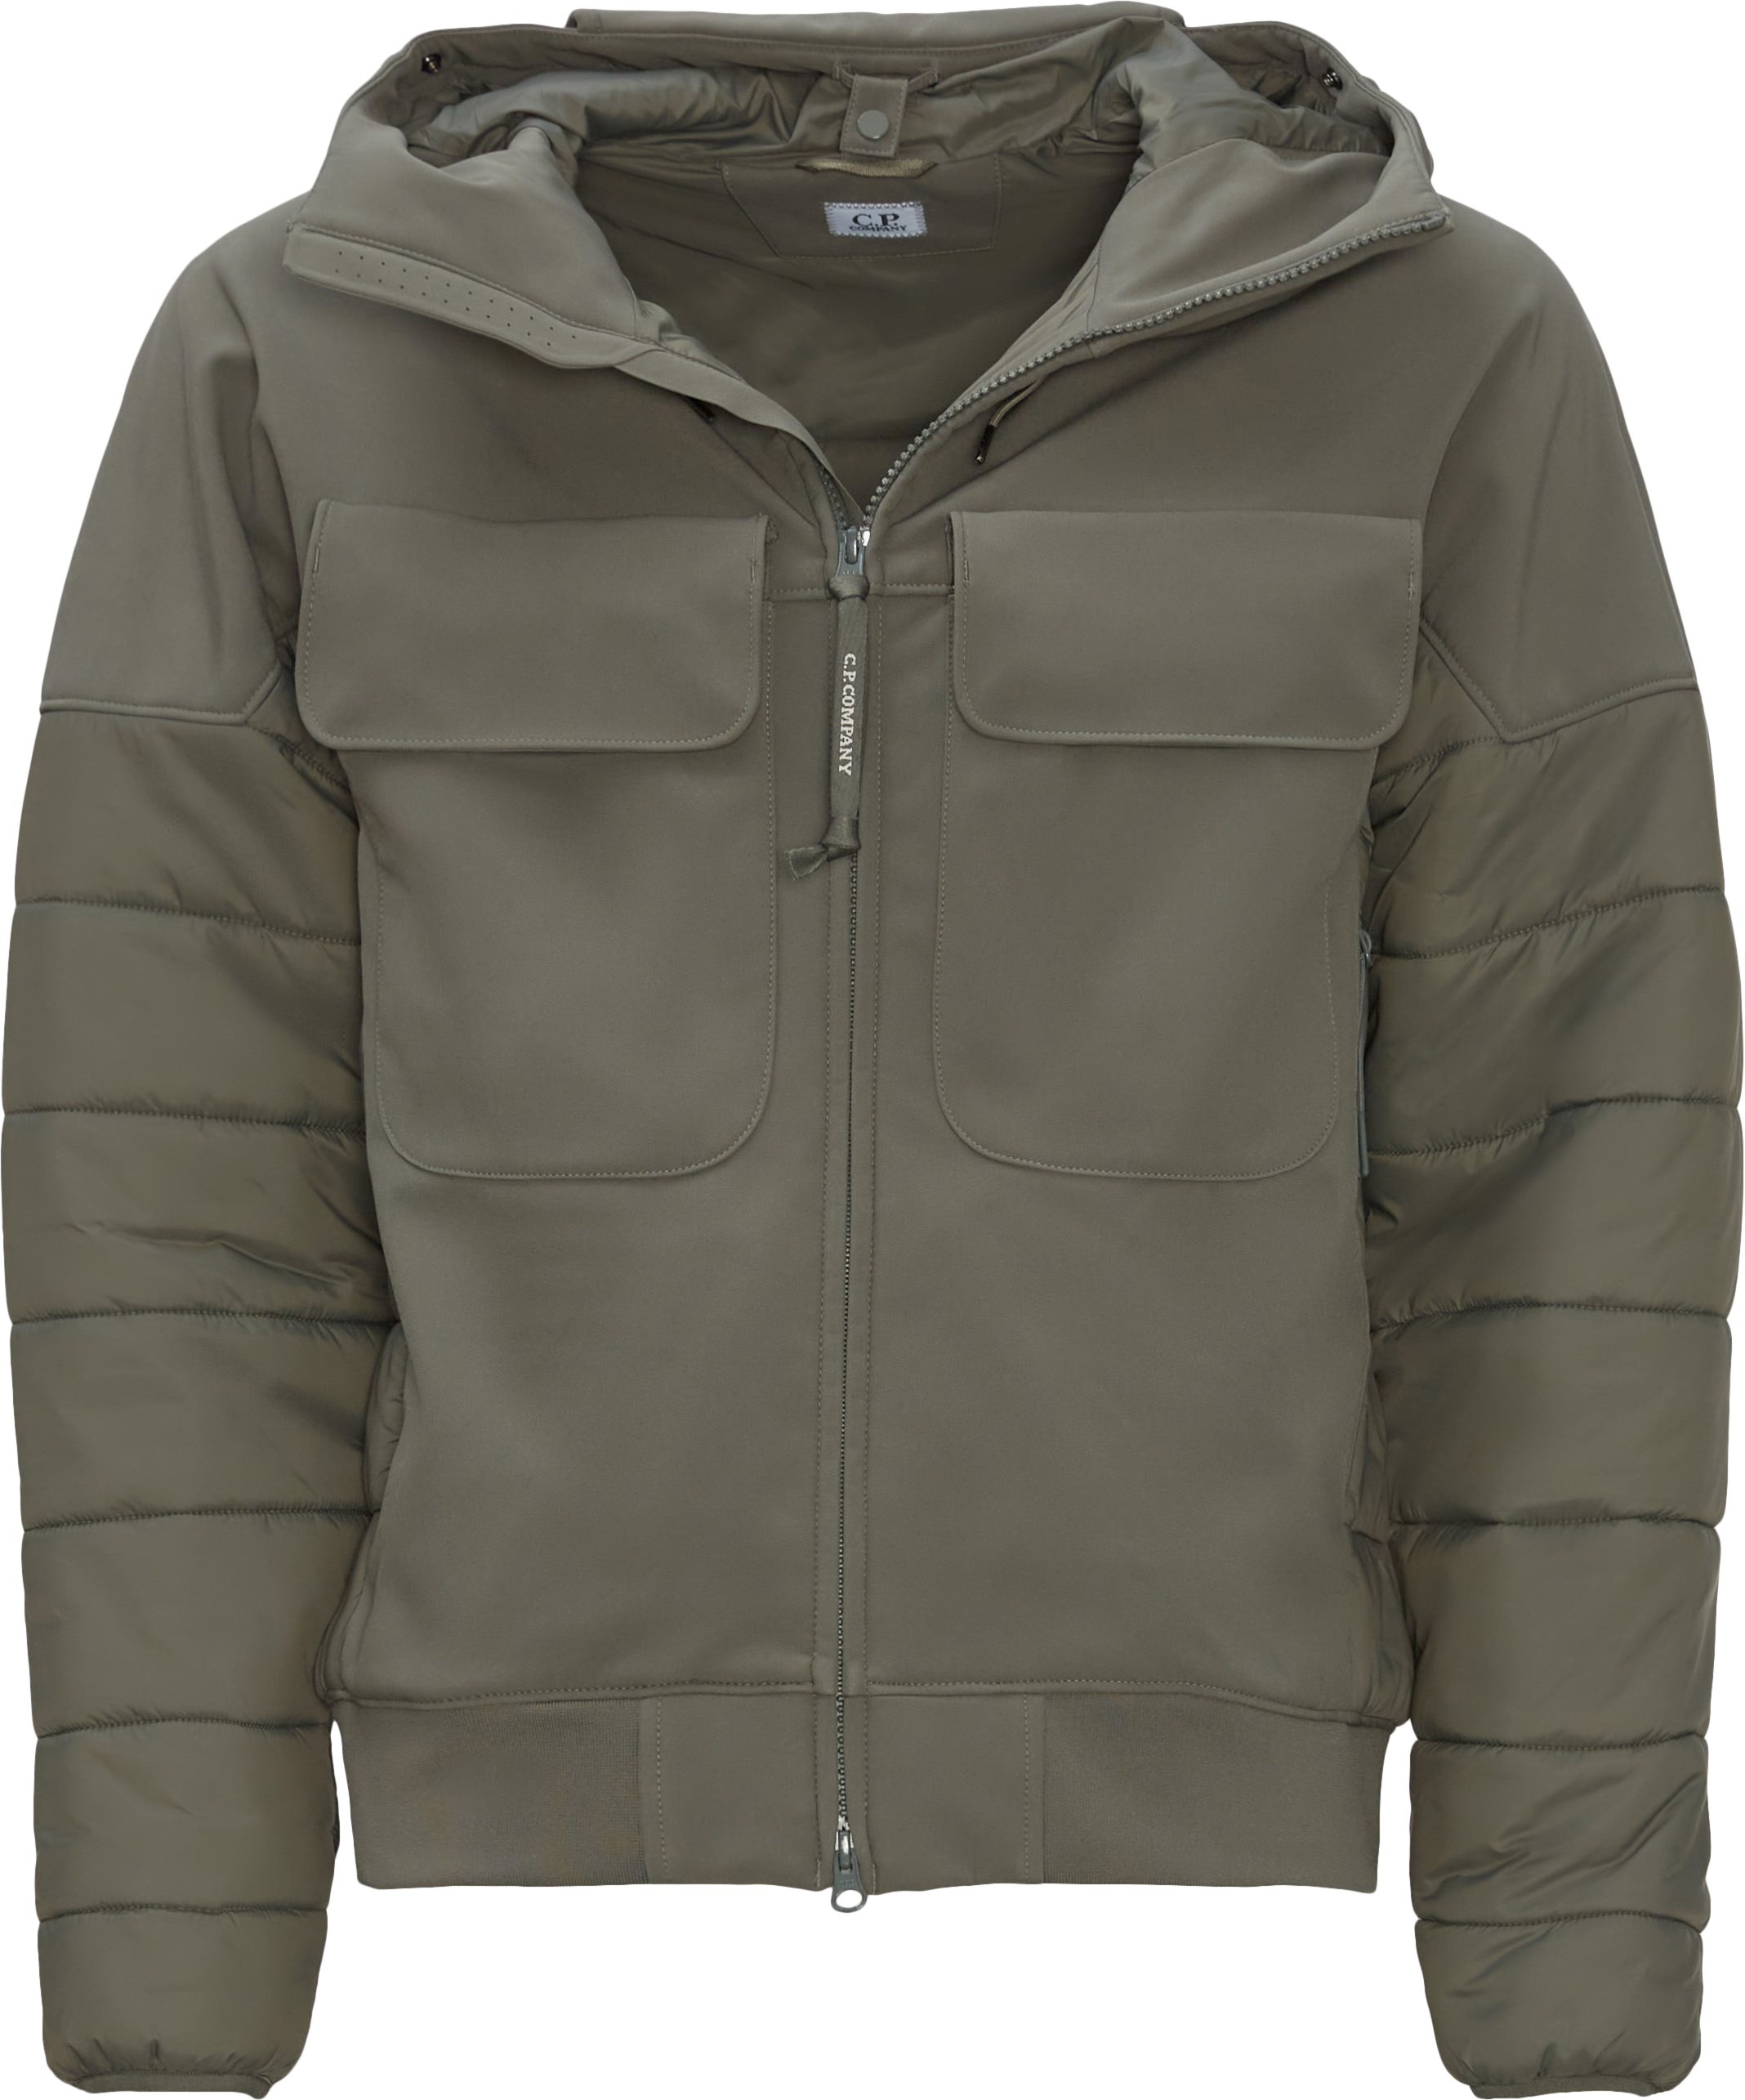 Jackets - Regular fit - Army